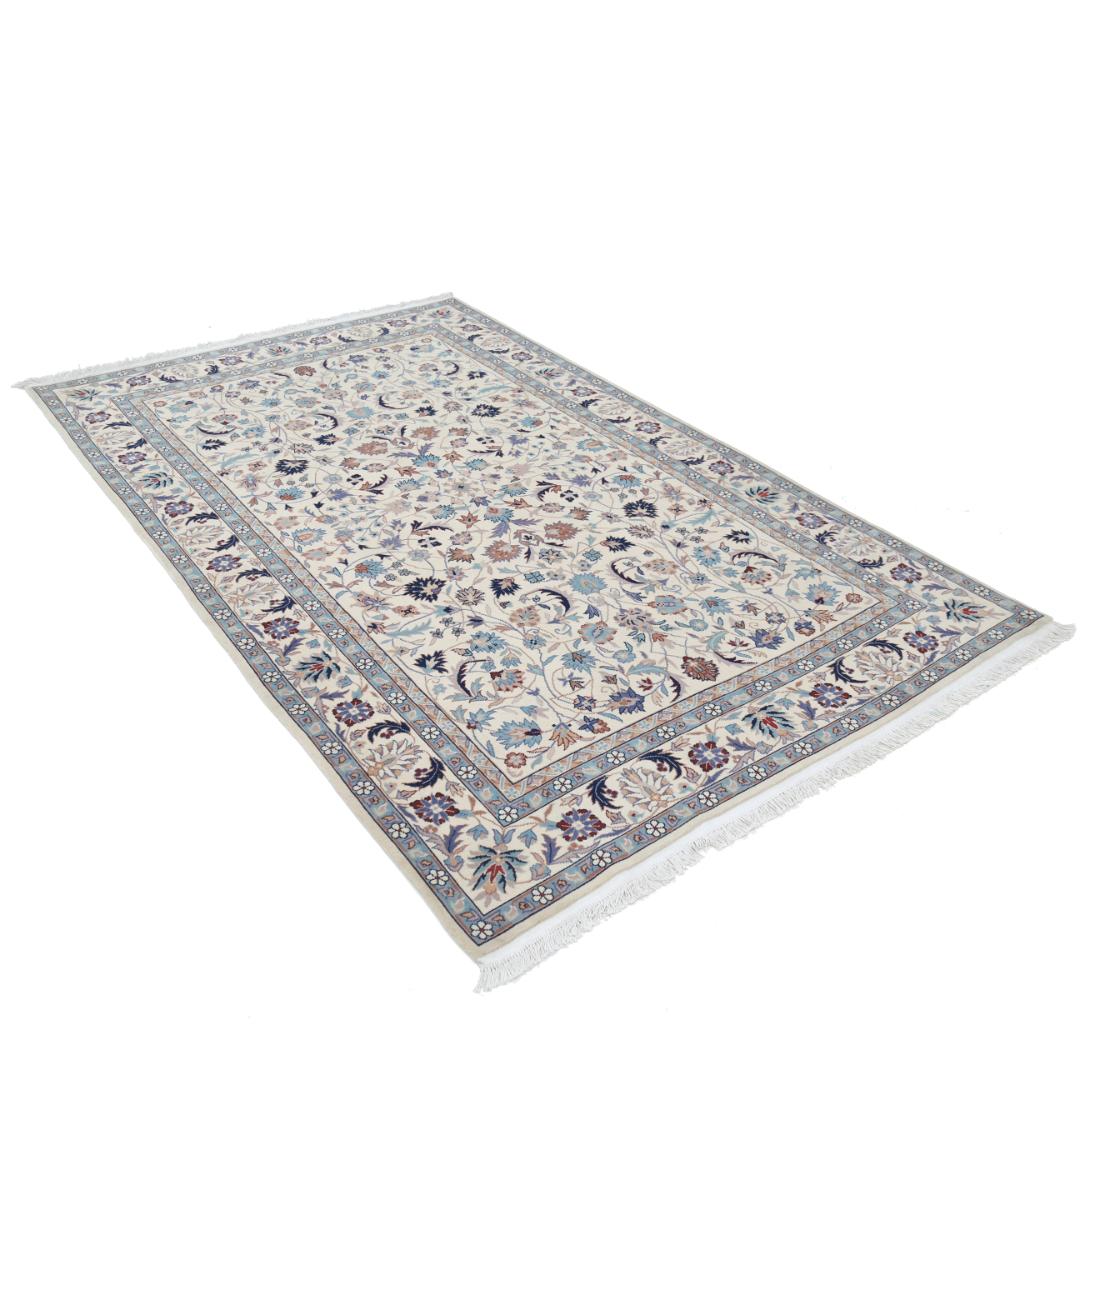 Heritage 5' 0" X 7' 4" Hand-Knotted Wool Rug 5' 0" X 7' 4" (152 X 224) / Ivory / Blue